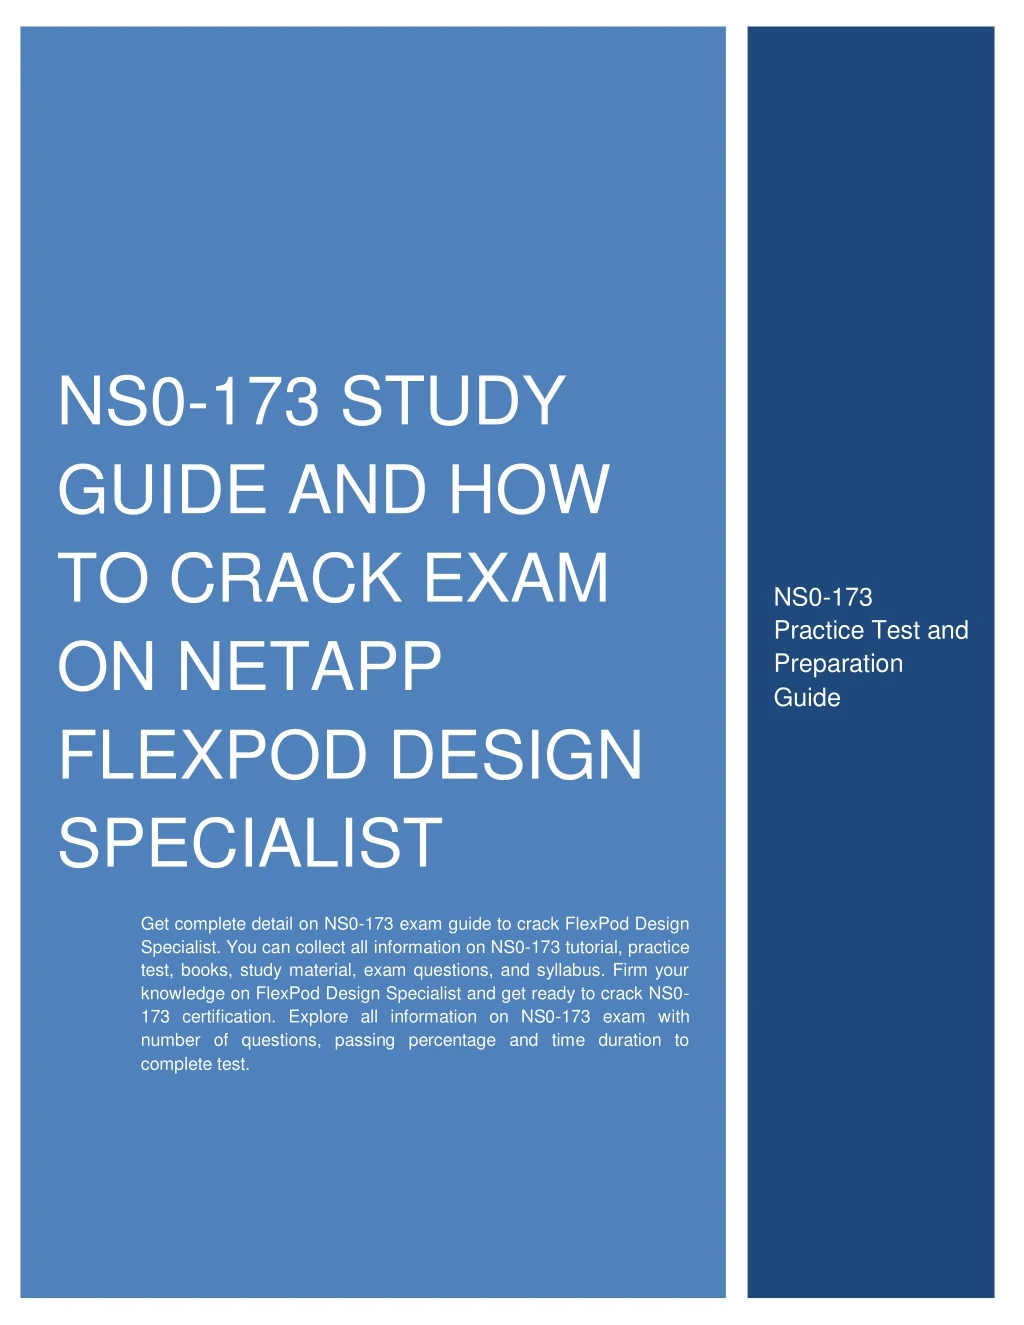 ns0 173 study guide and how to crack exam